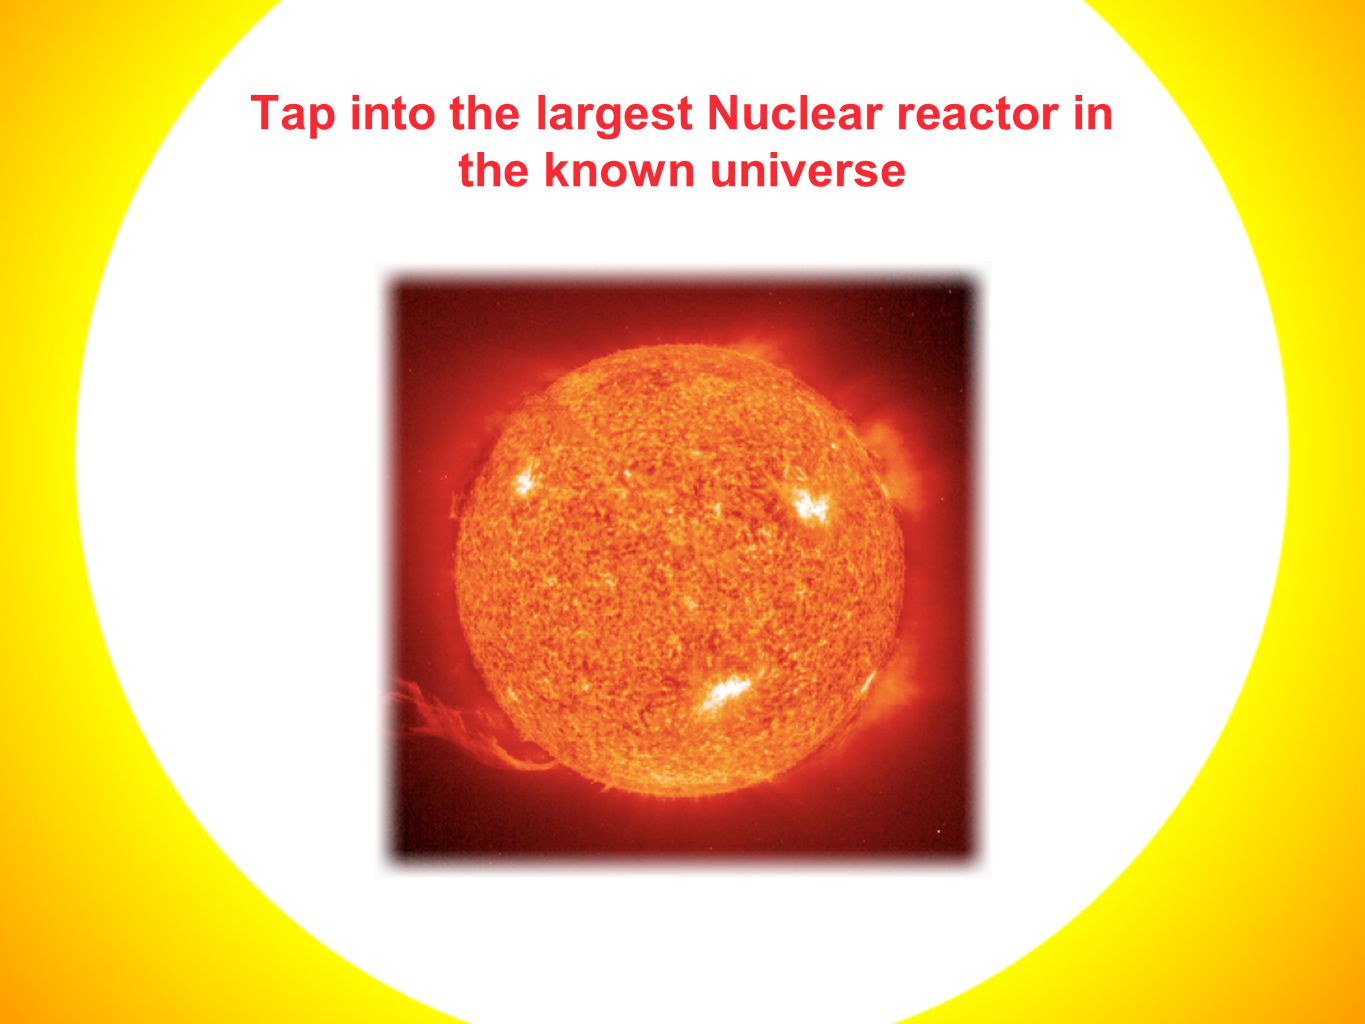 Tap into the largest Nuclear reactor in the known universe